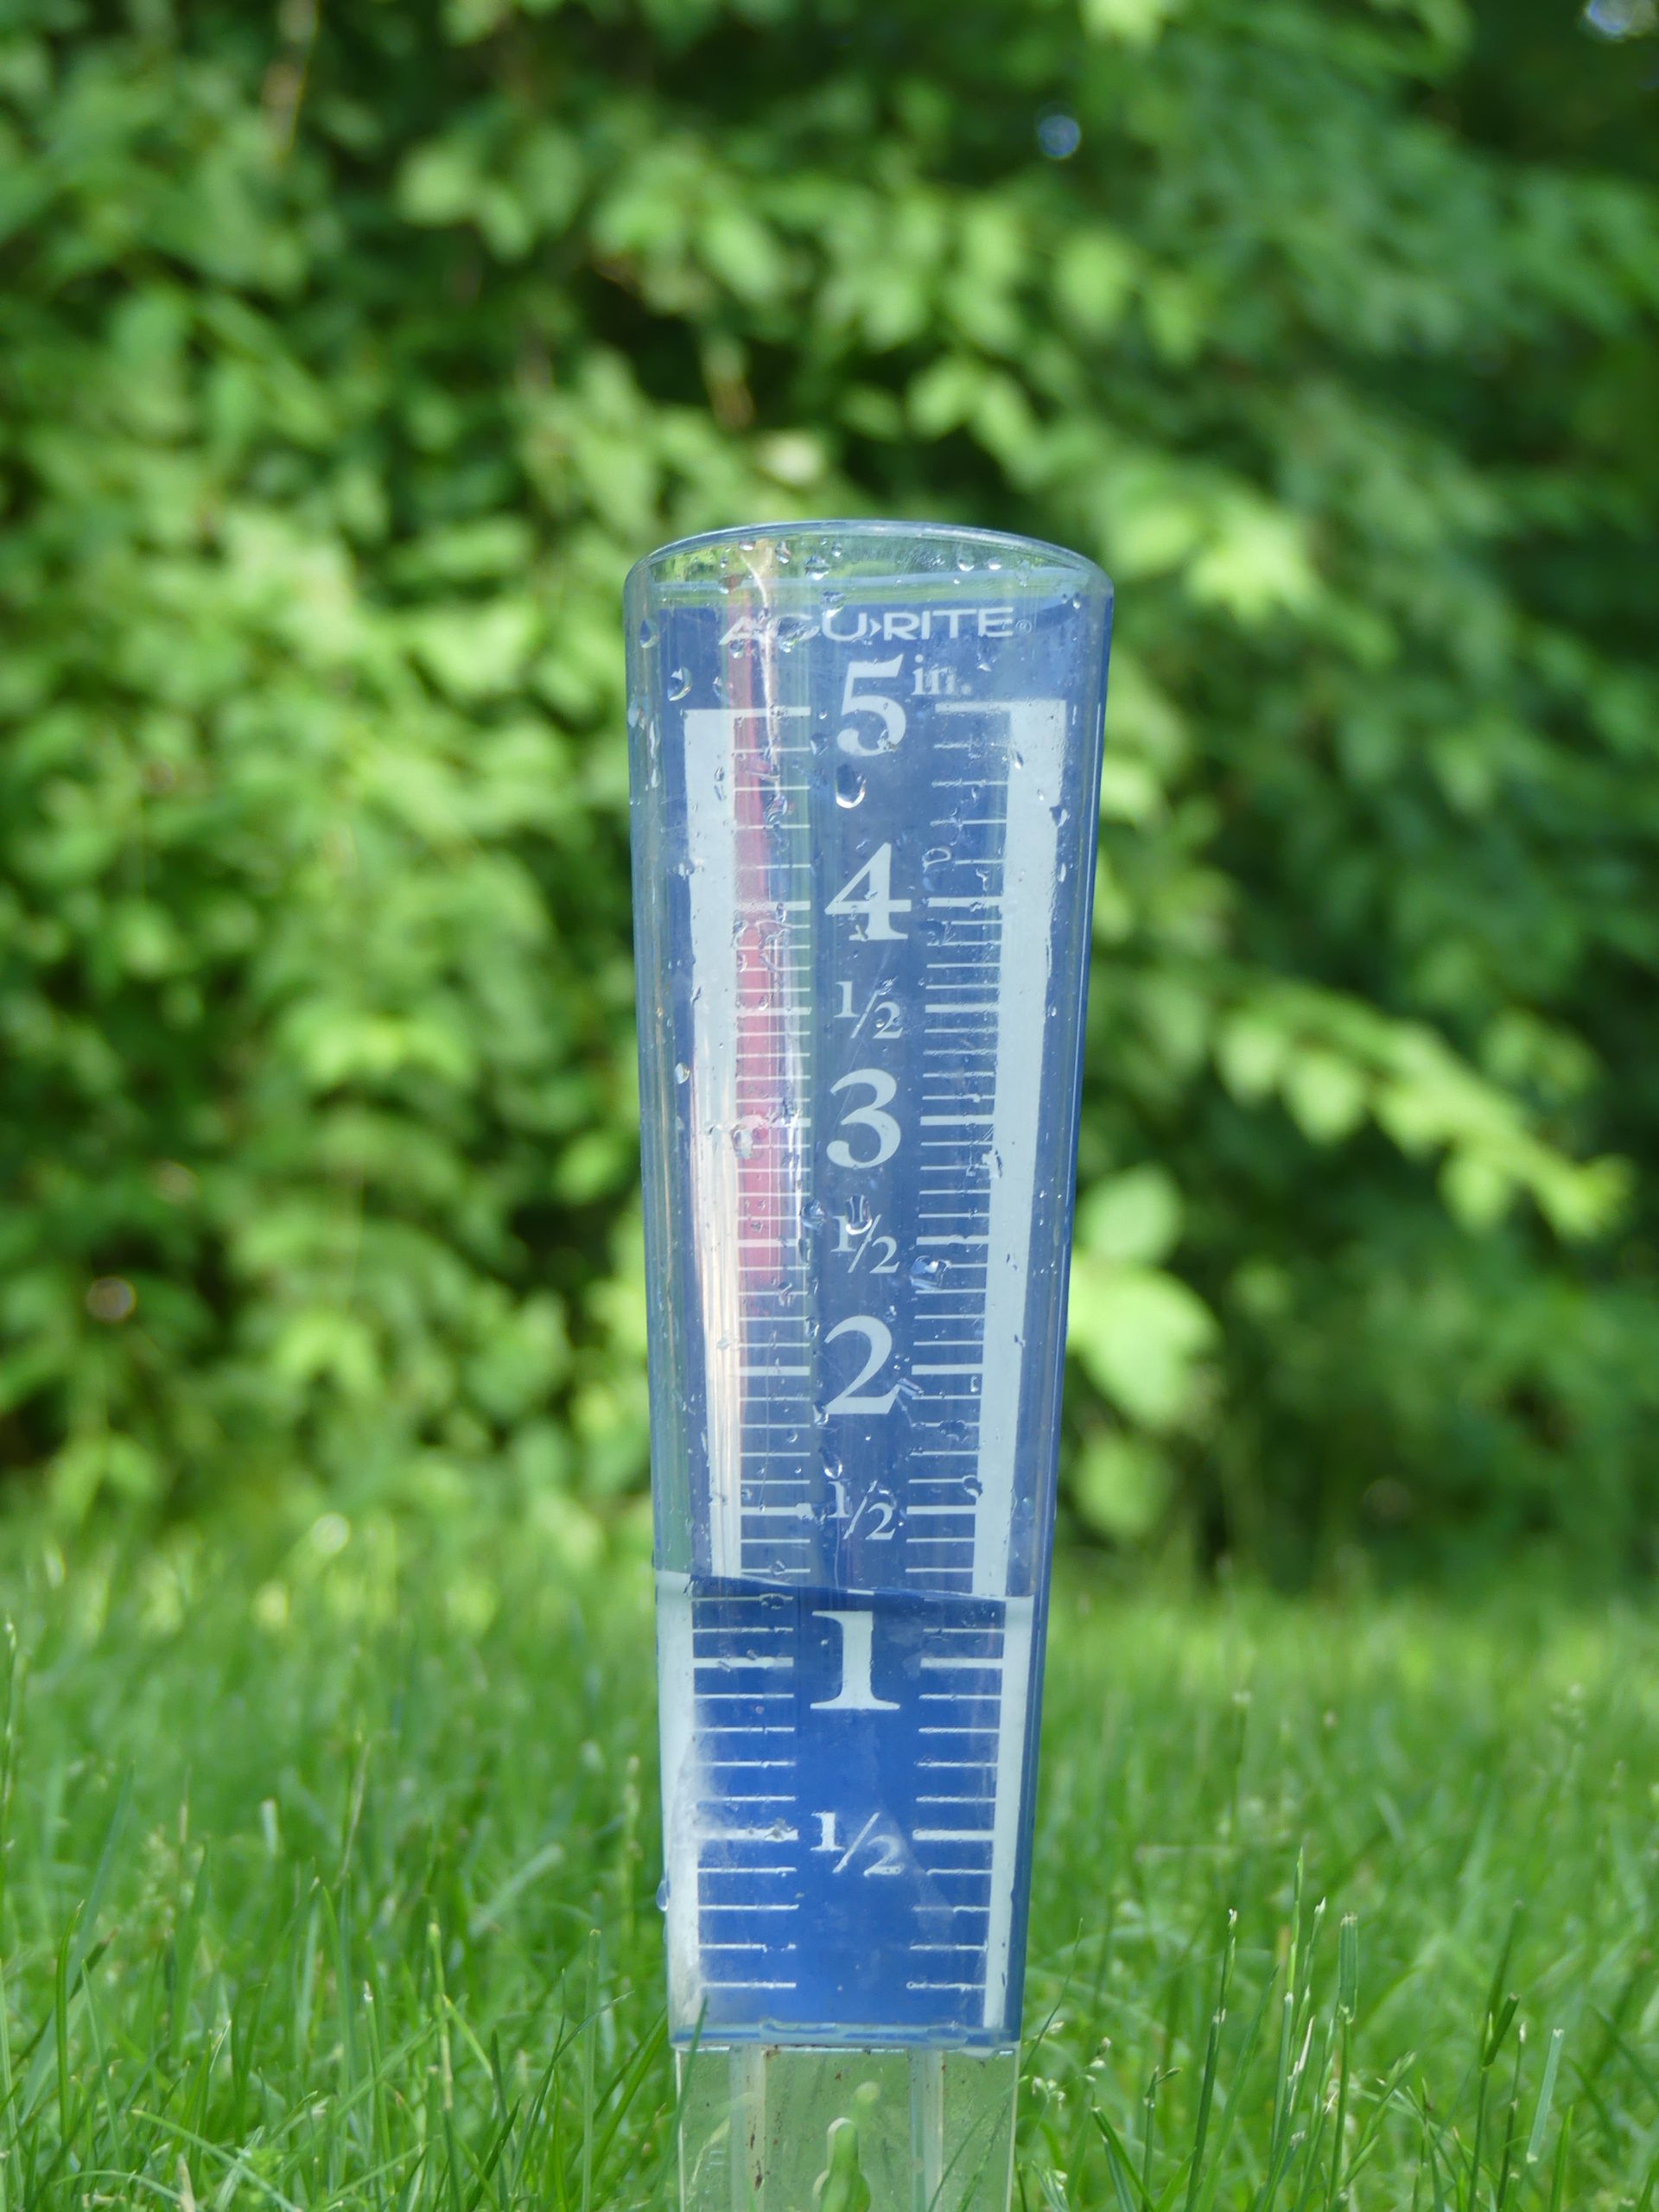 An inexpensive rain gauge (when emptied regularly and installed level) helps you know how much water your sprinkler(s) are putting out and how much water that thunderstorm dropped. They are available at most garden centers and hardware stores or online. Keep in mind the mantra: 2 inches a week.